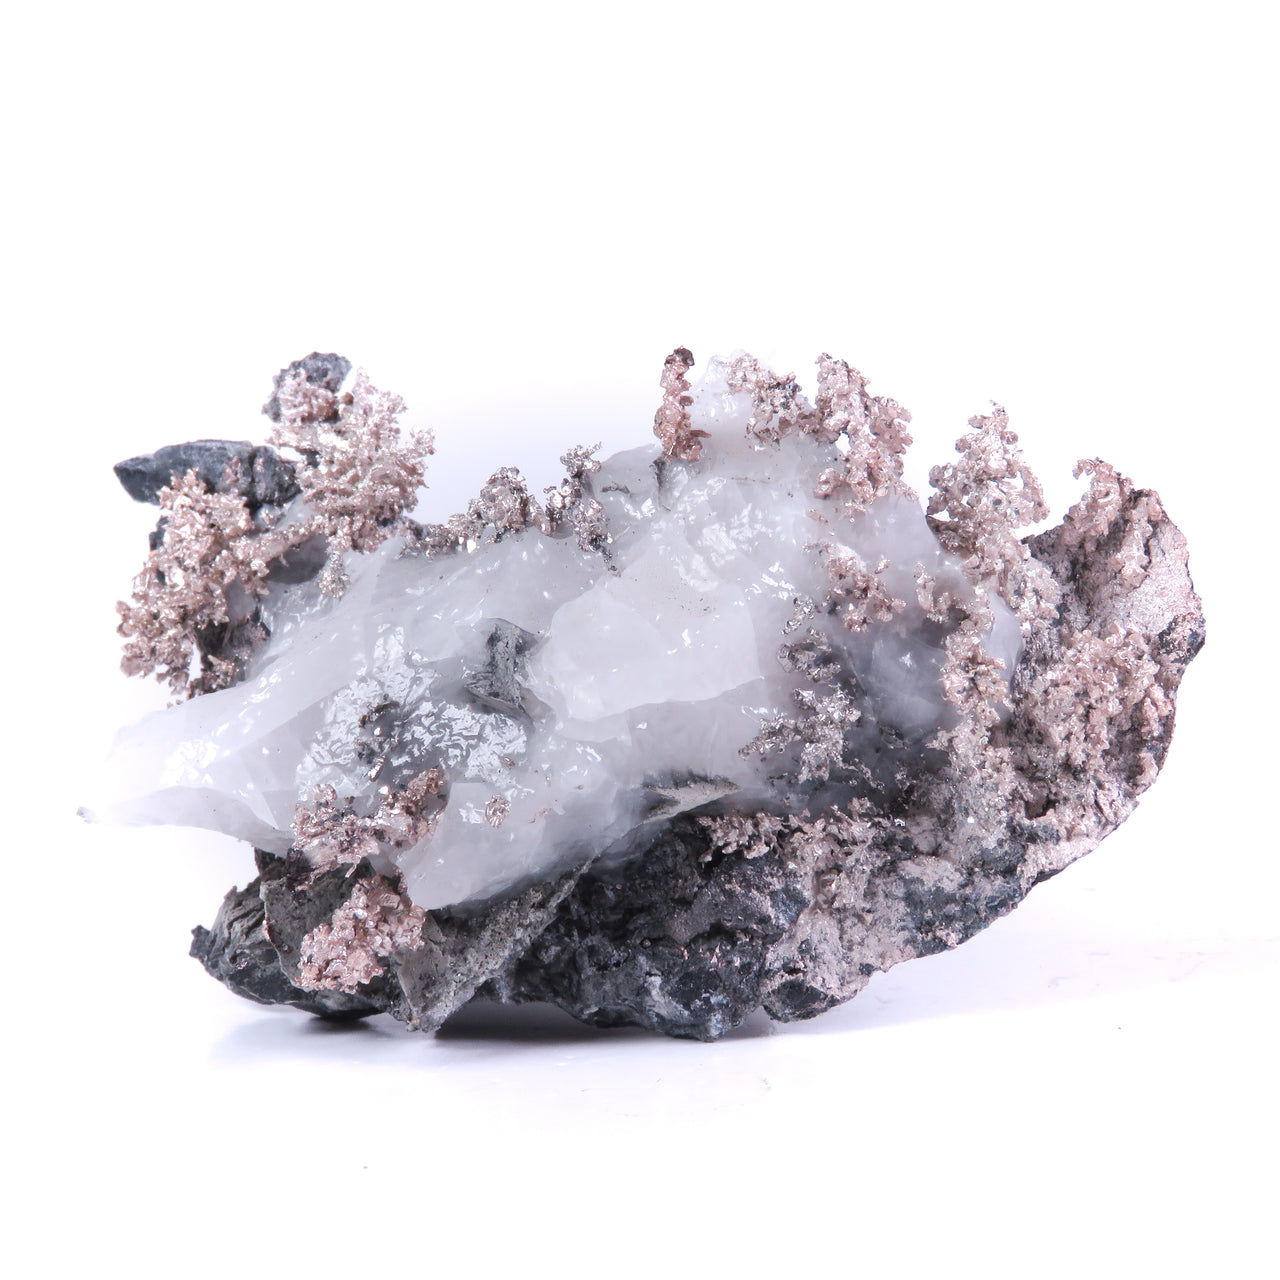 SILVER & ACANTHITE ON CALCITE